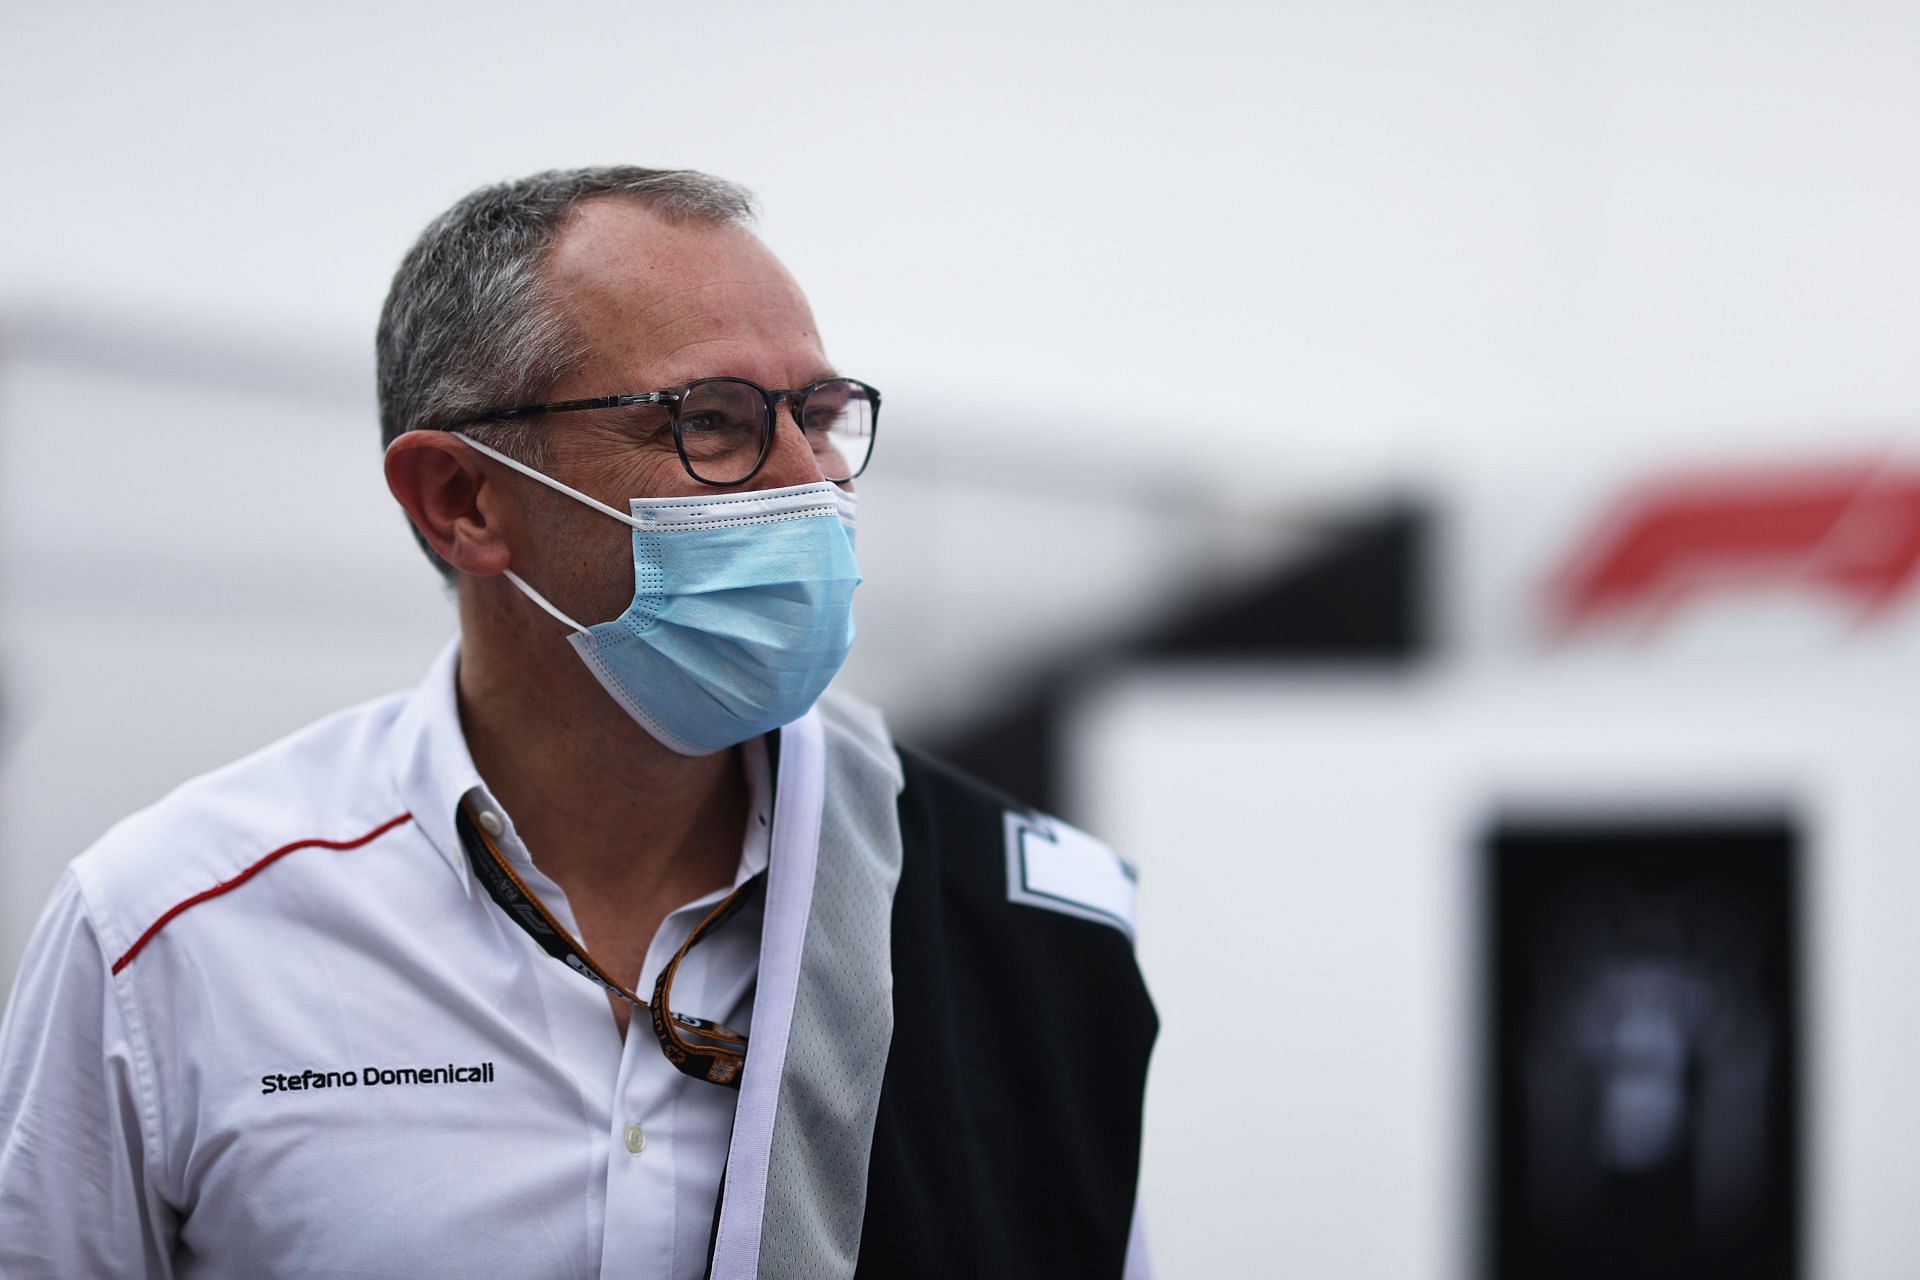 F1 CEO Stefano Domenicali in the paddock (Photo by Chris Graythen/Getty Images)